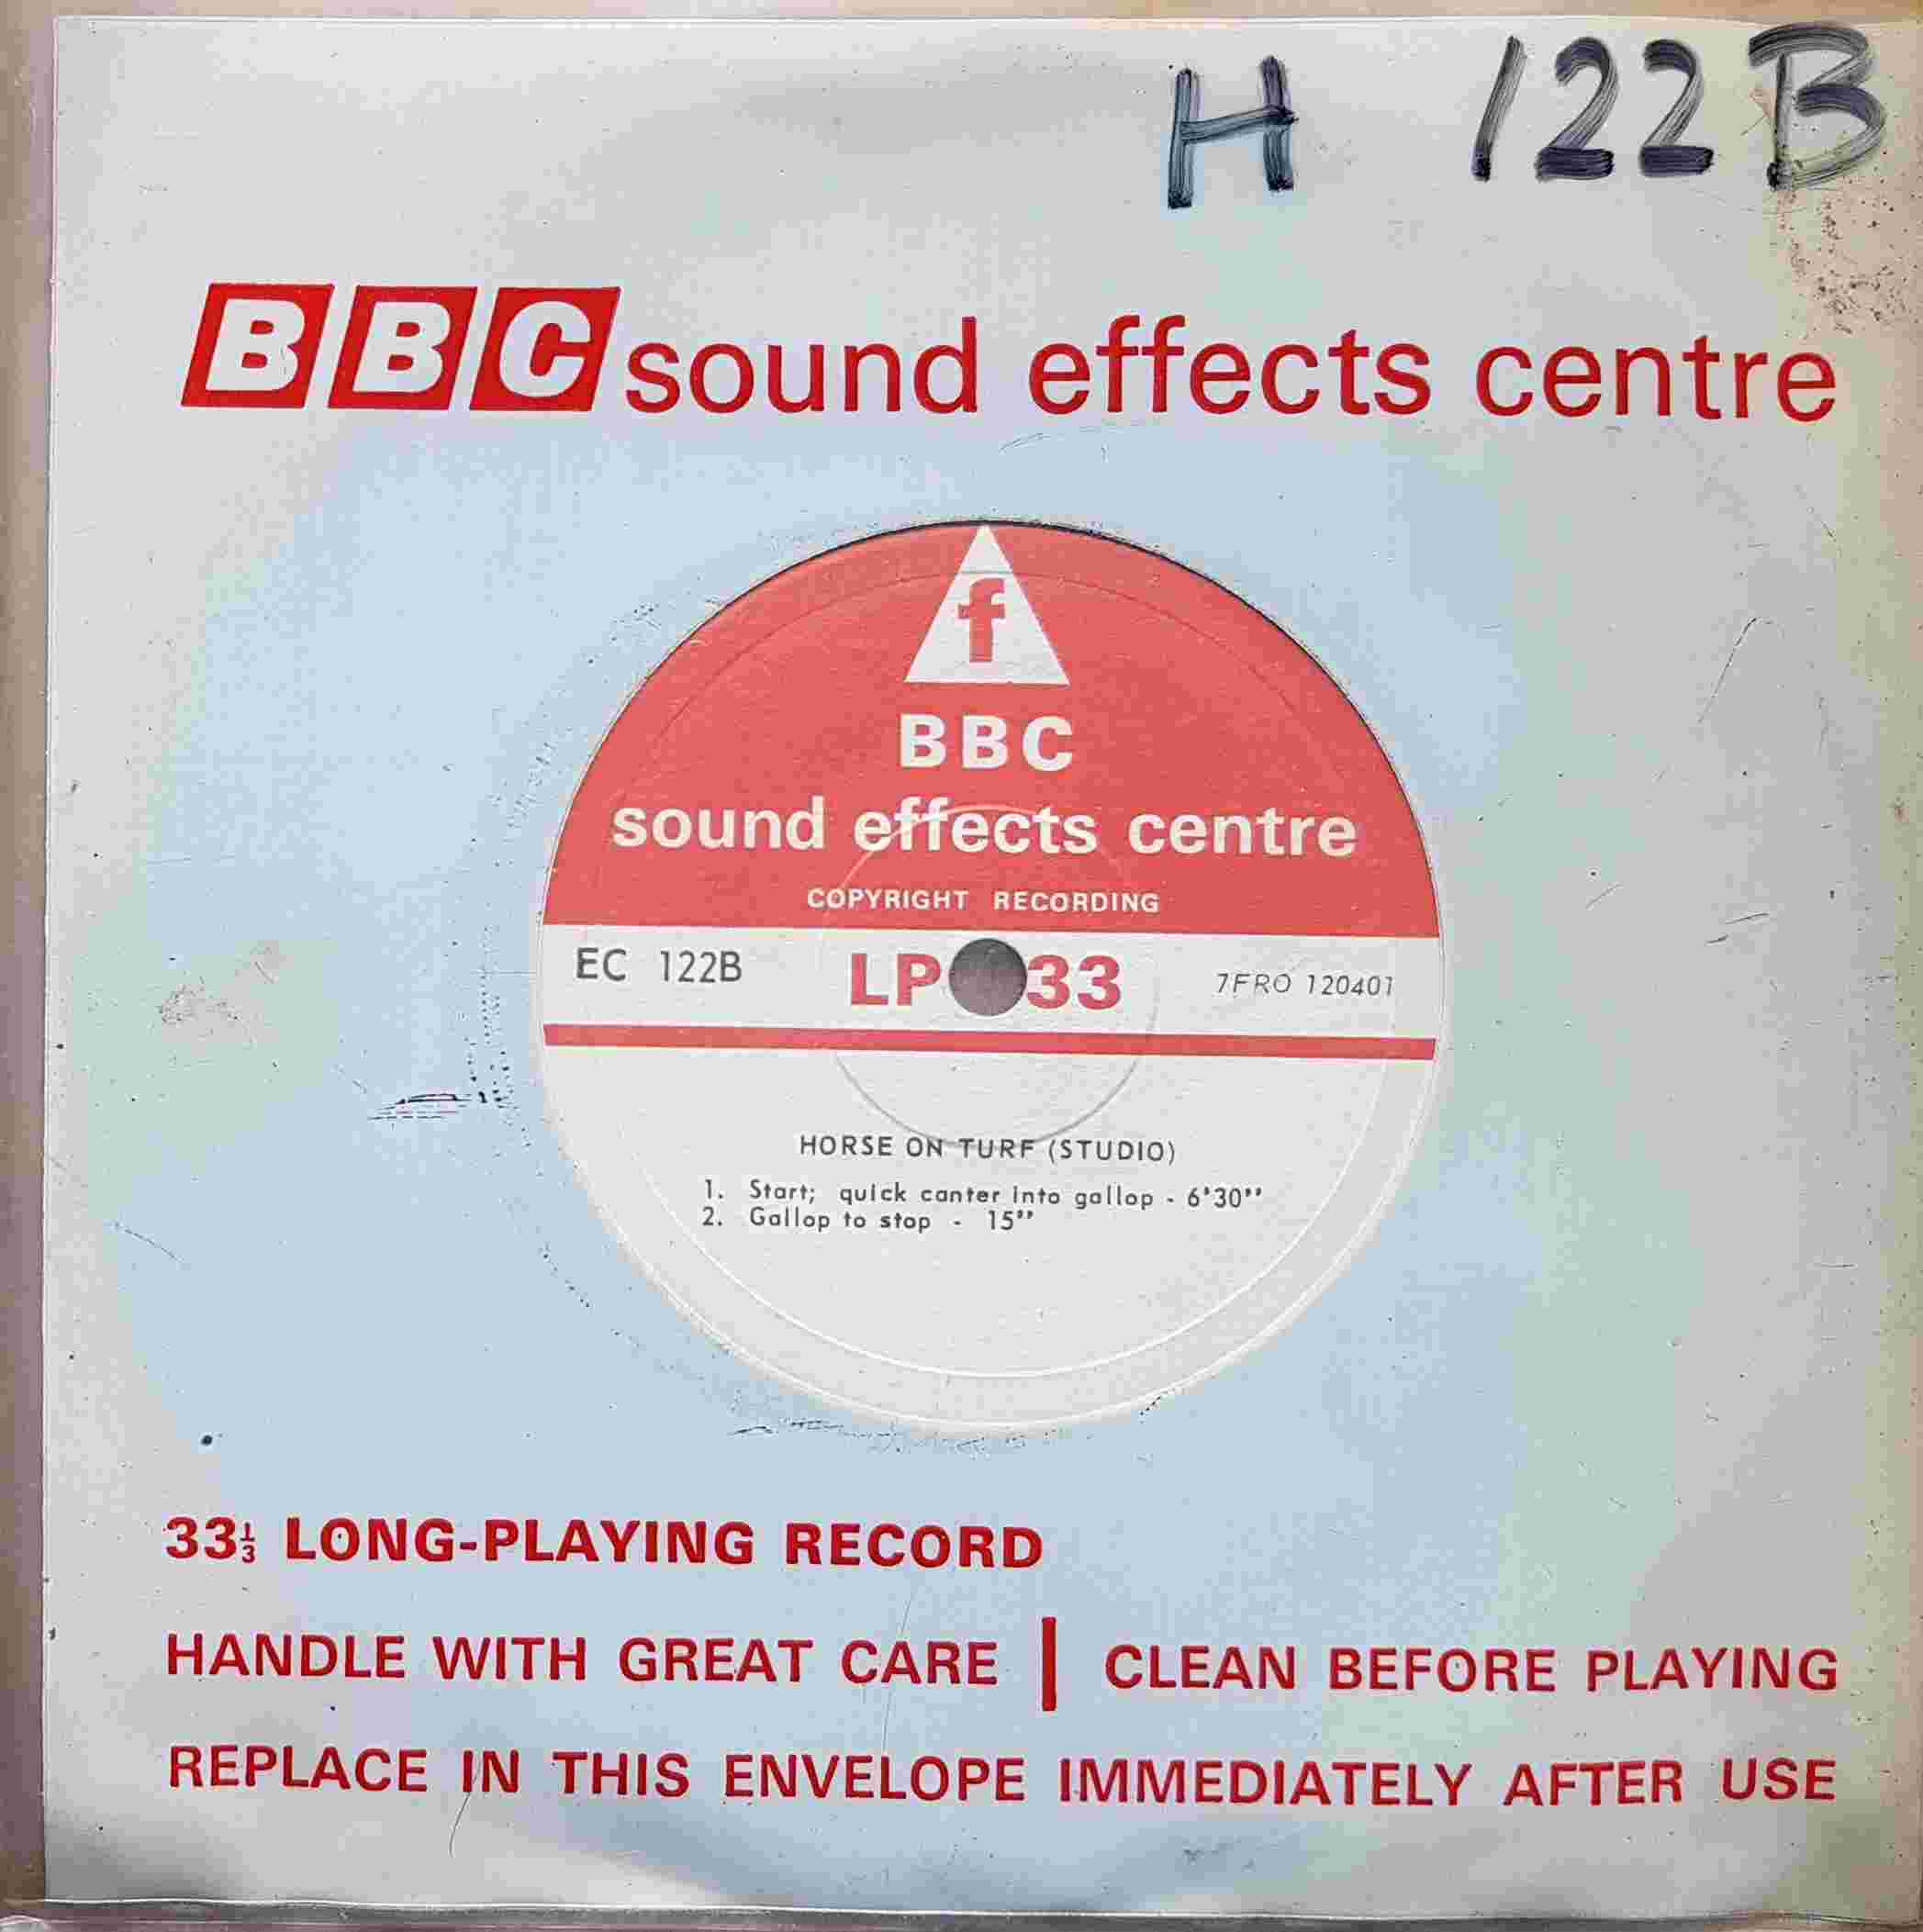 Picture of EC 122B Horse on turf (Studio) / 2 horses on turf (Studio) by artist Not registered from the BBC records and Tapes library